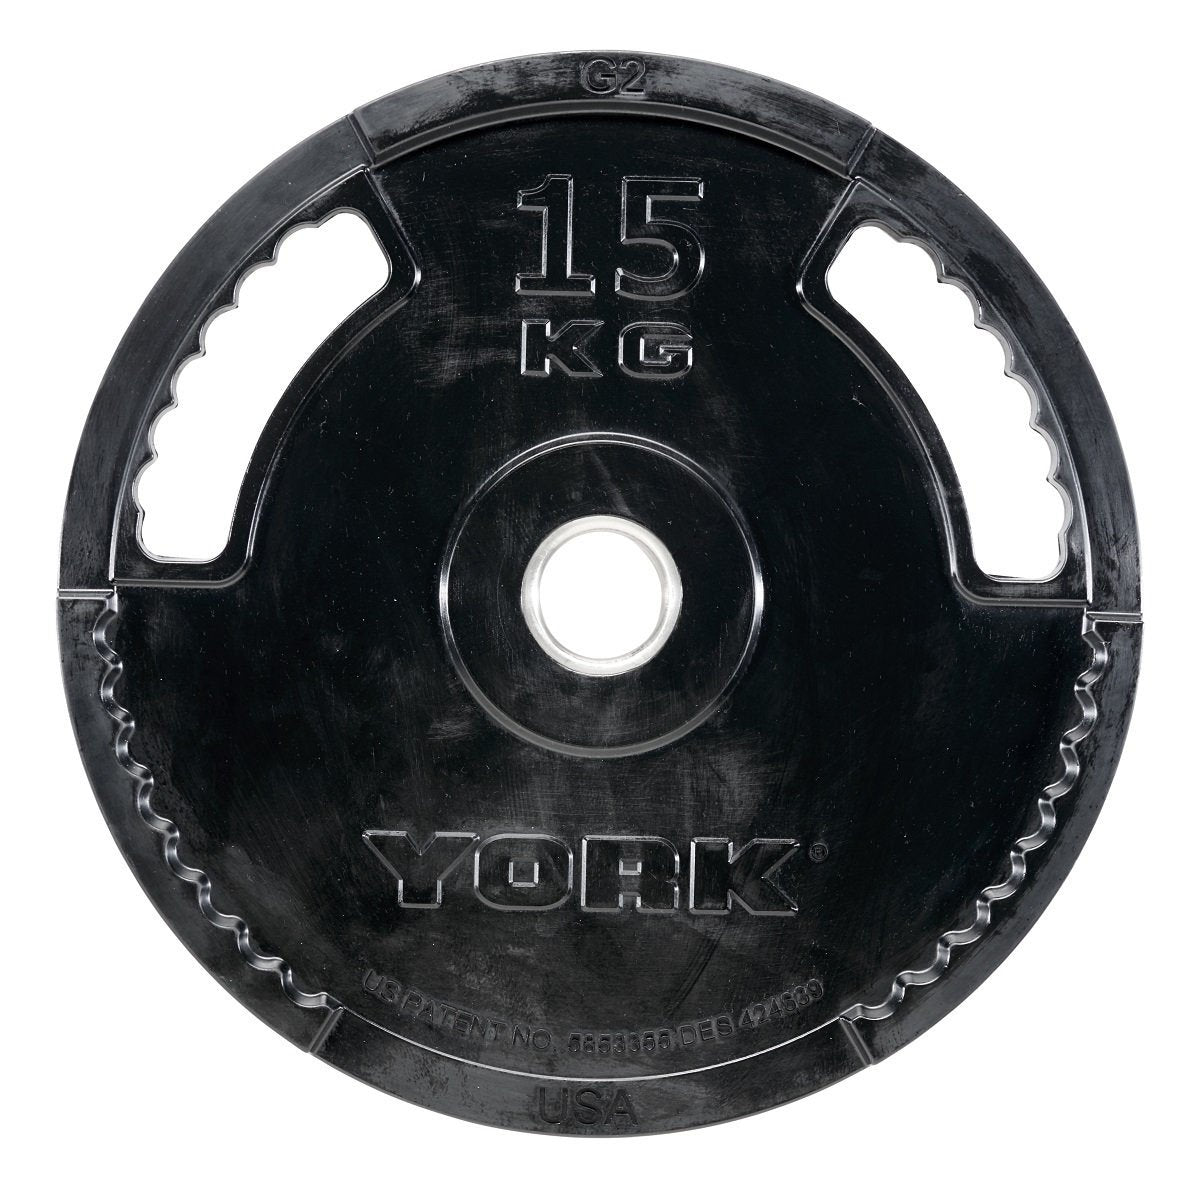 York 15kg G2 Rubber Thin Line Olympic Weight Plate